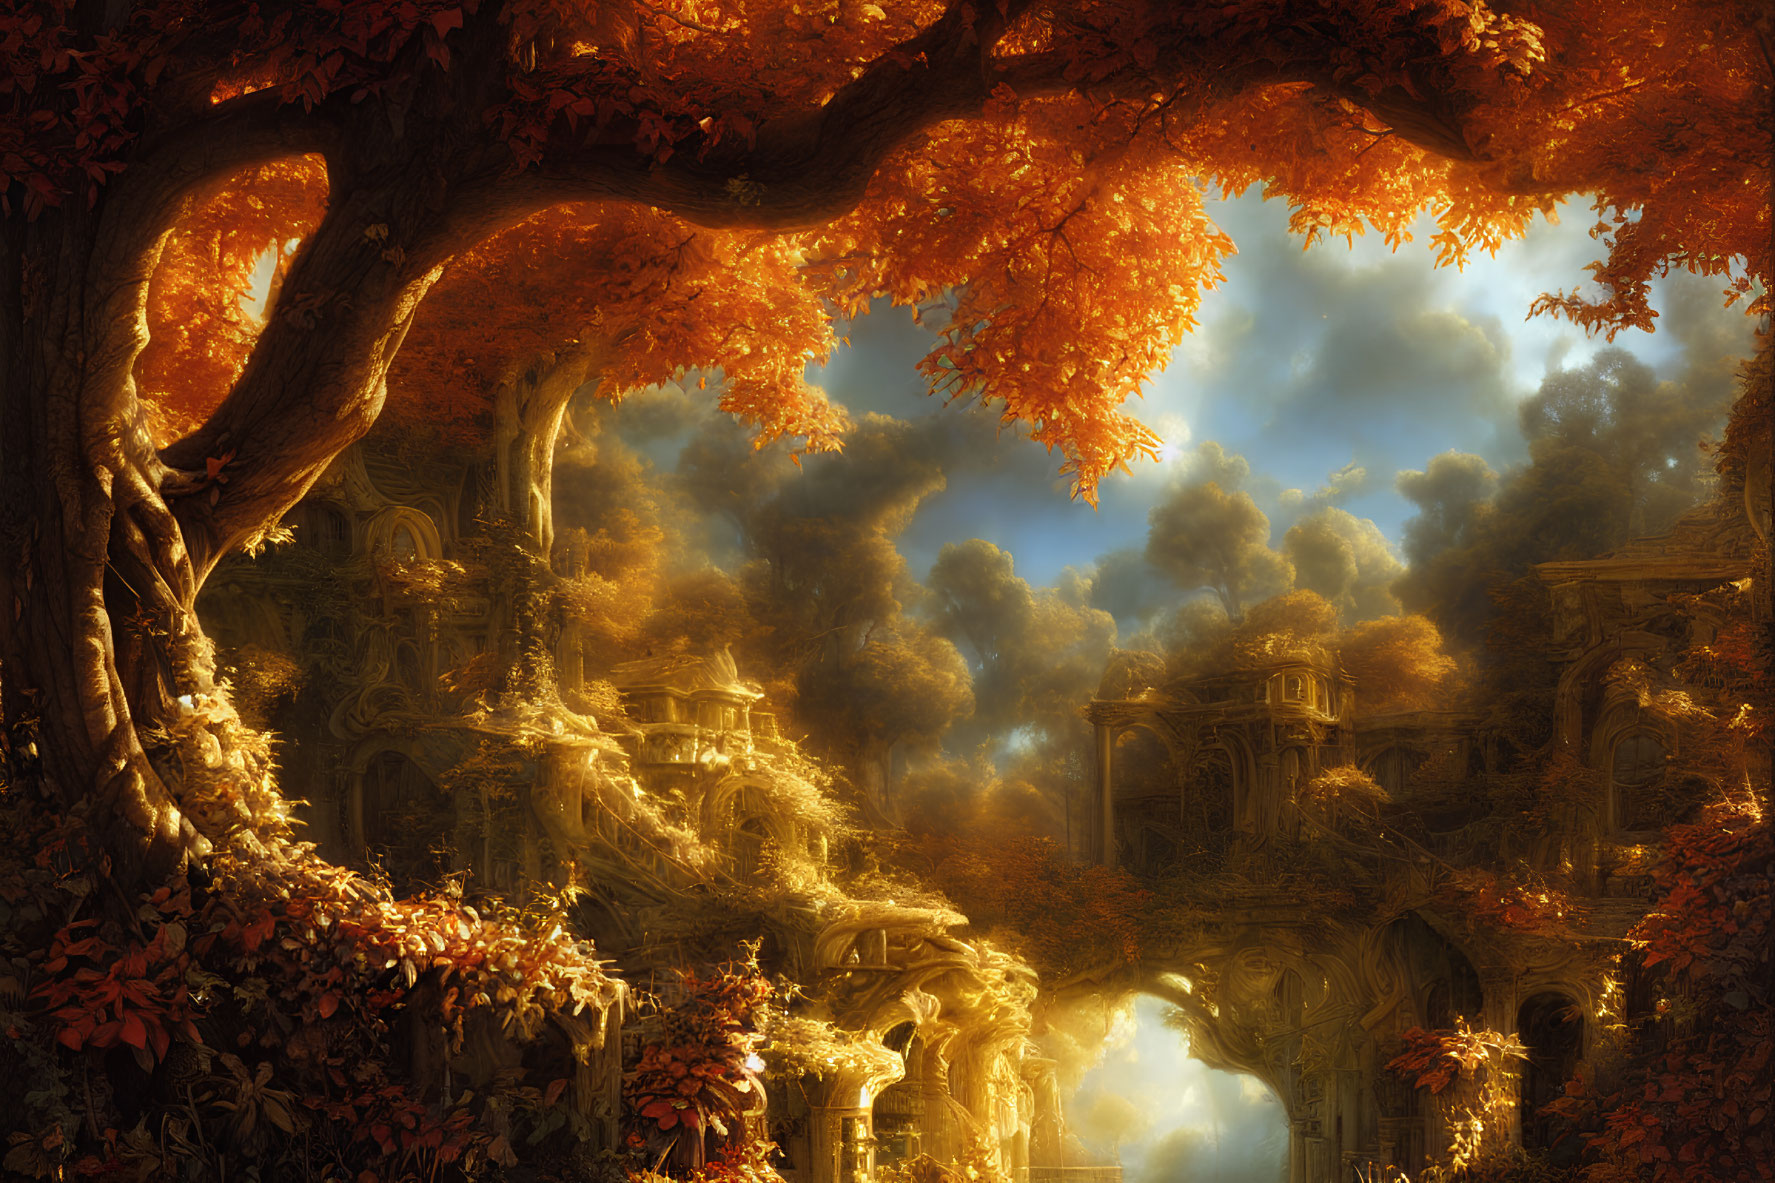 Golden autumn forest and ancient overgrown ruins in warm light